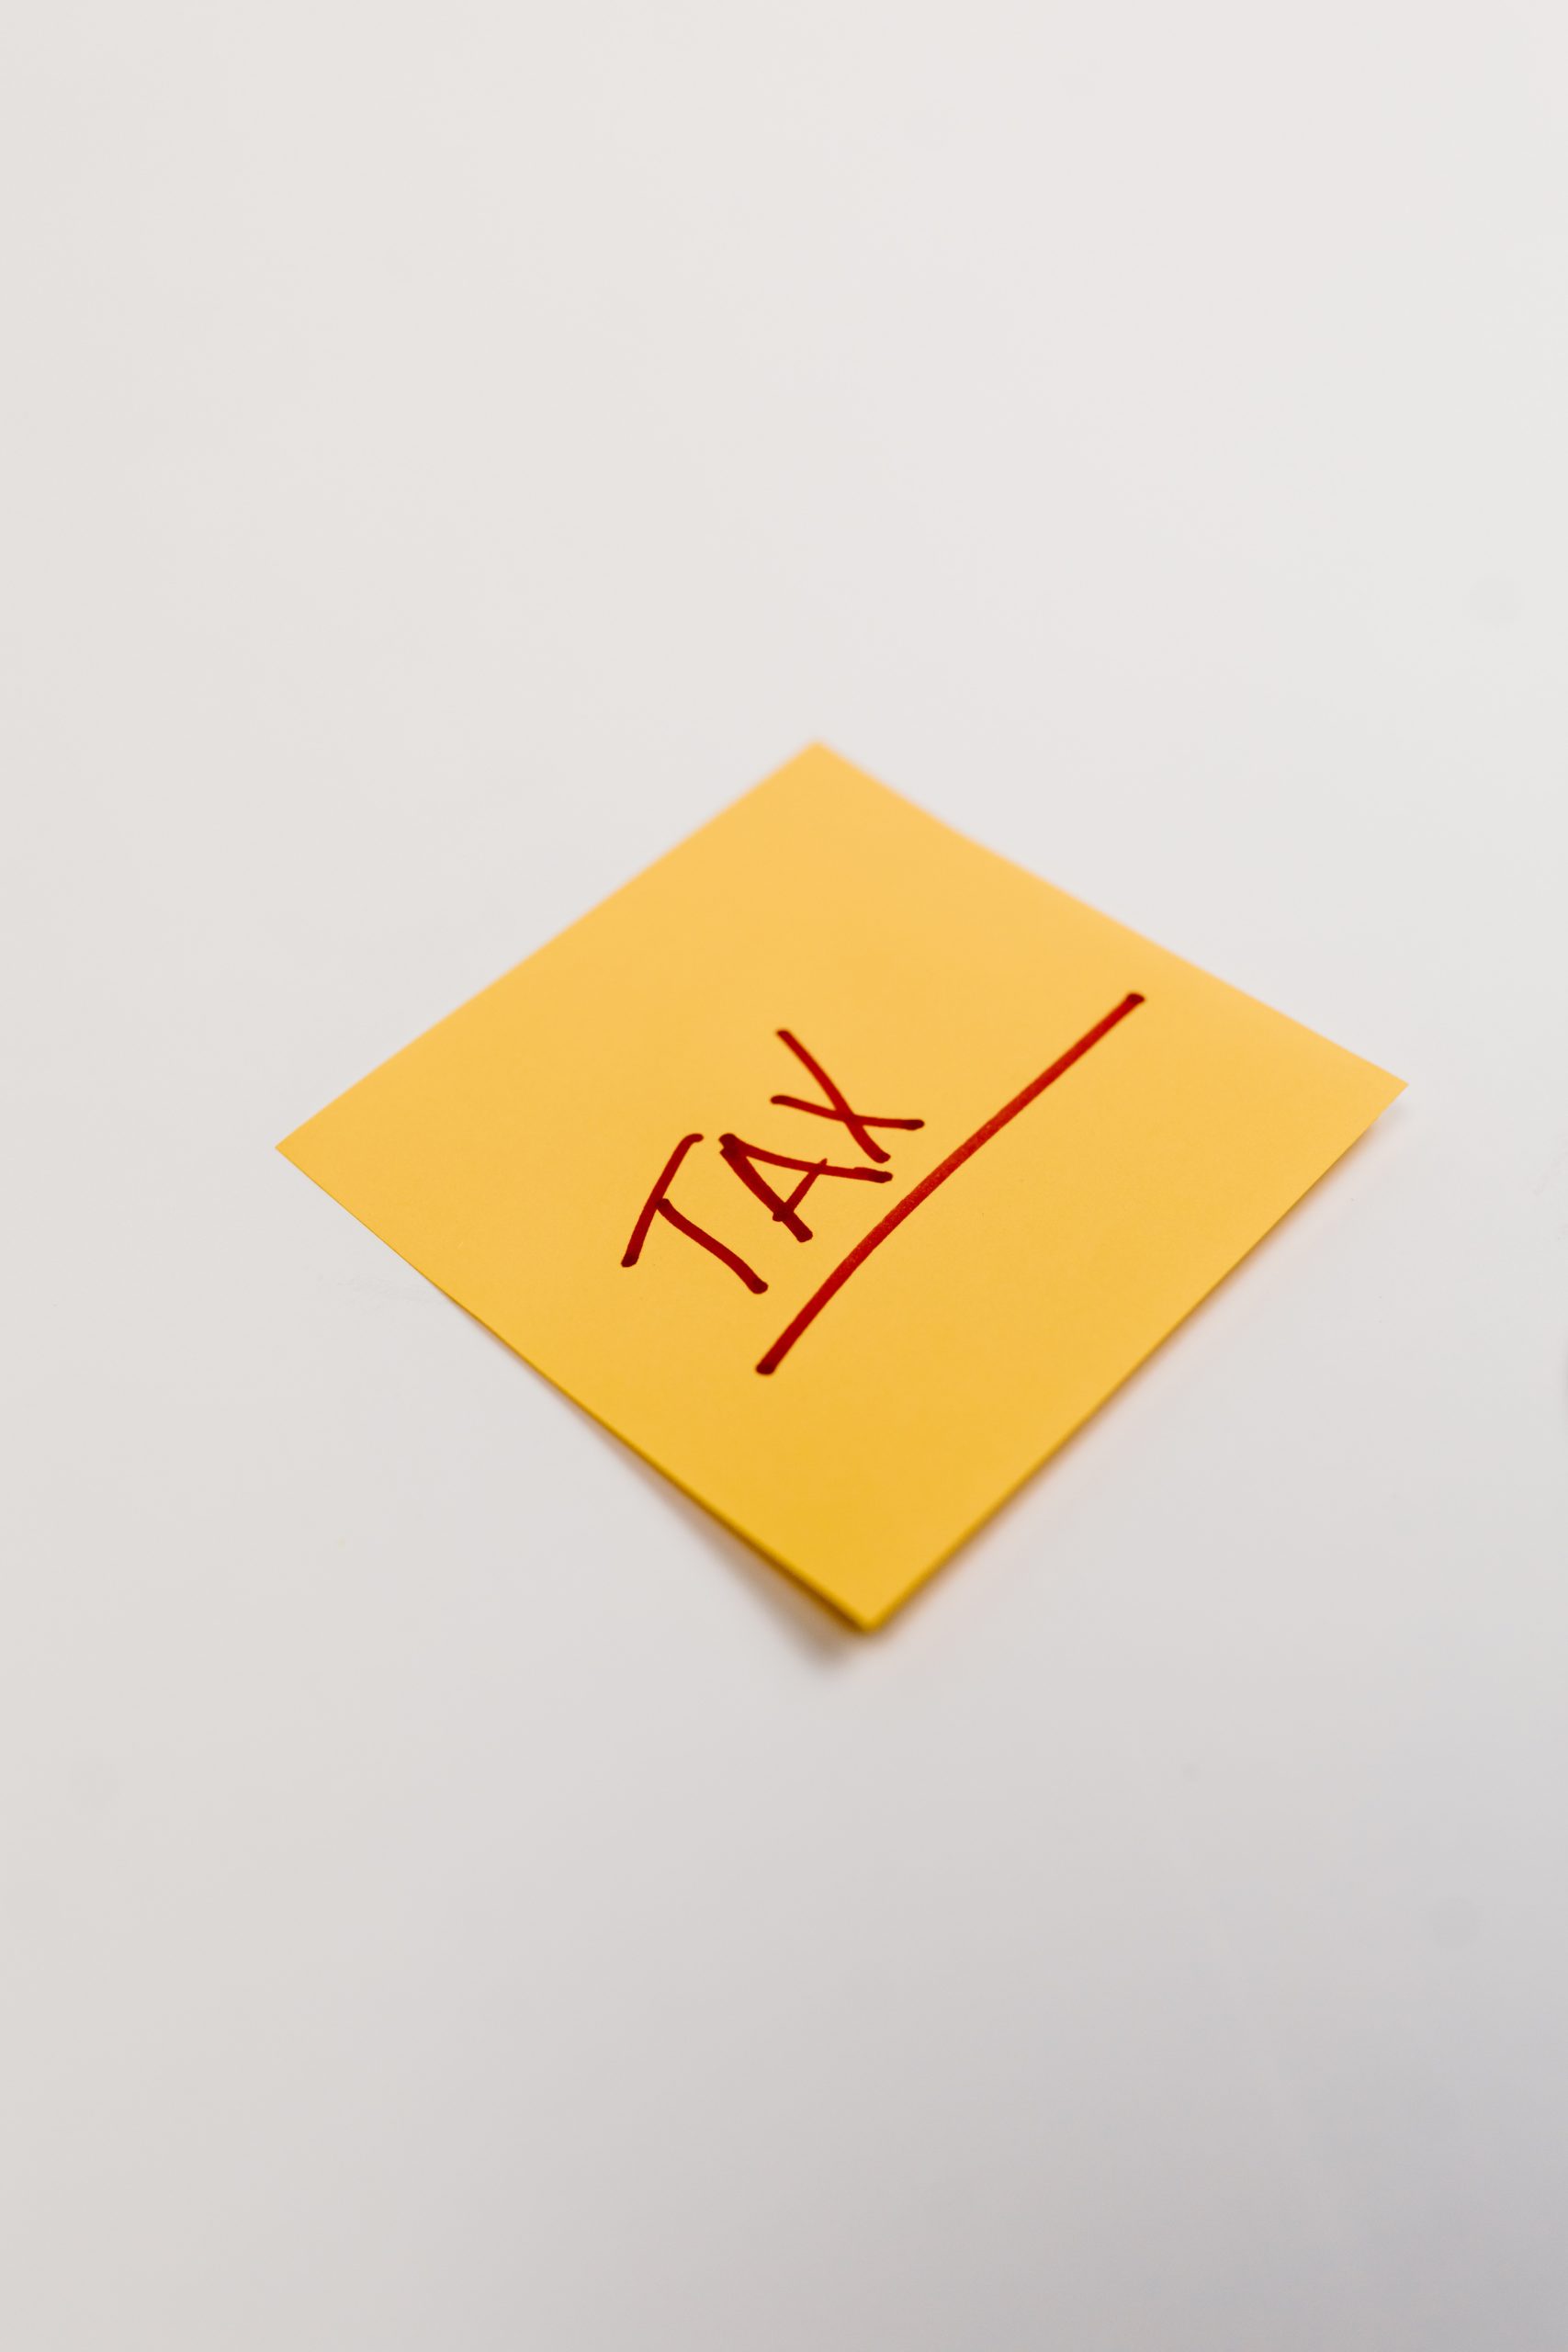 Yellow sticky note which read Tax